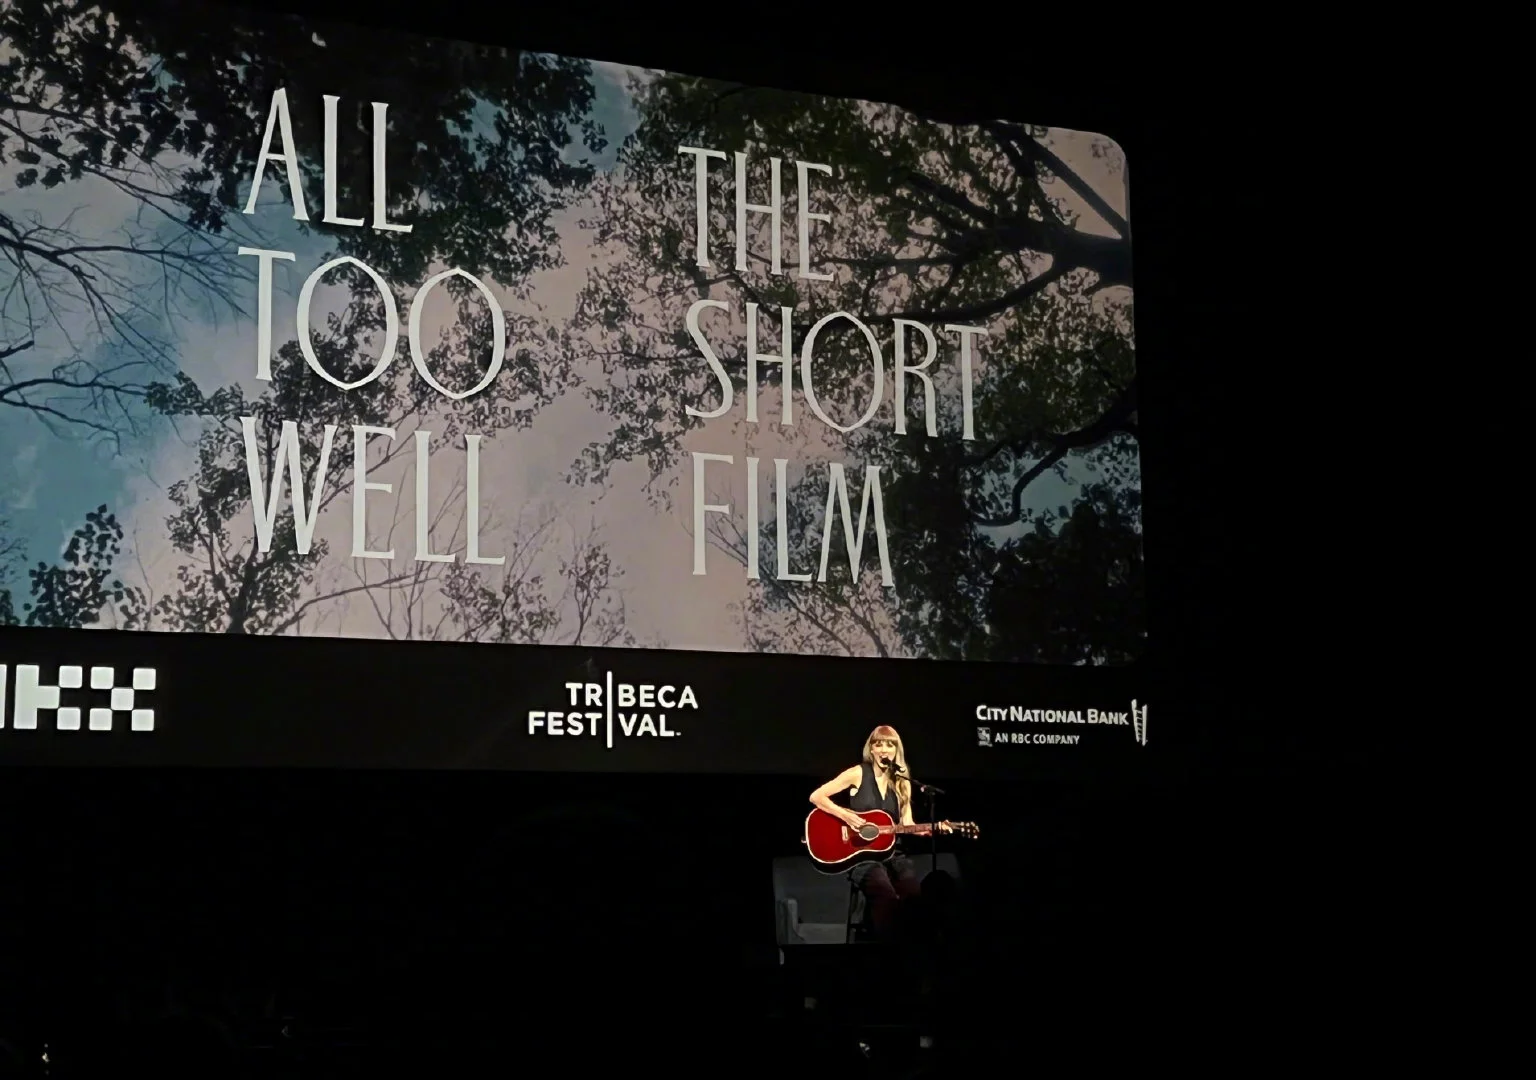 Taylor Swift with her short film "All Too Well" at Tribeca Film Festival in New York